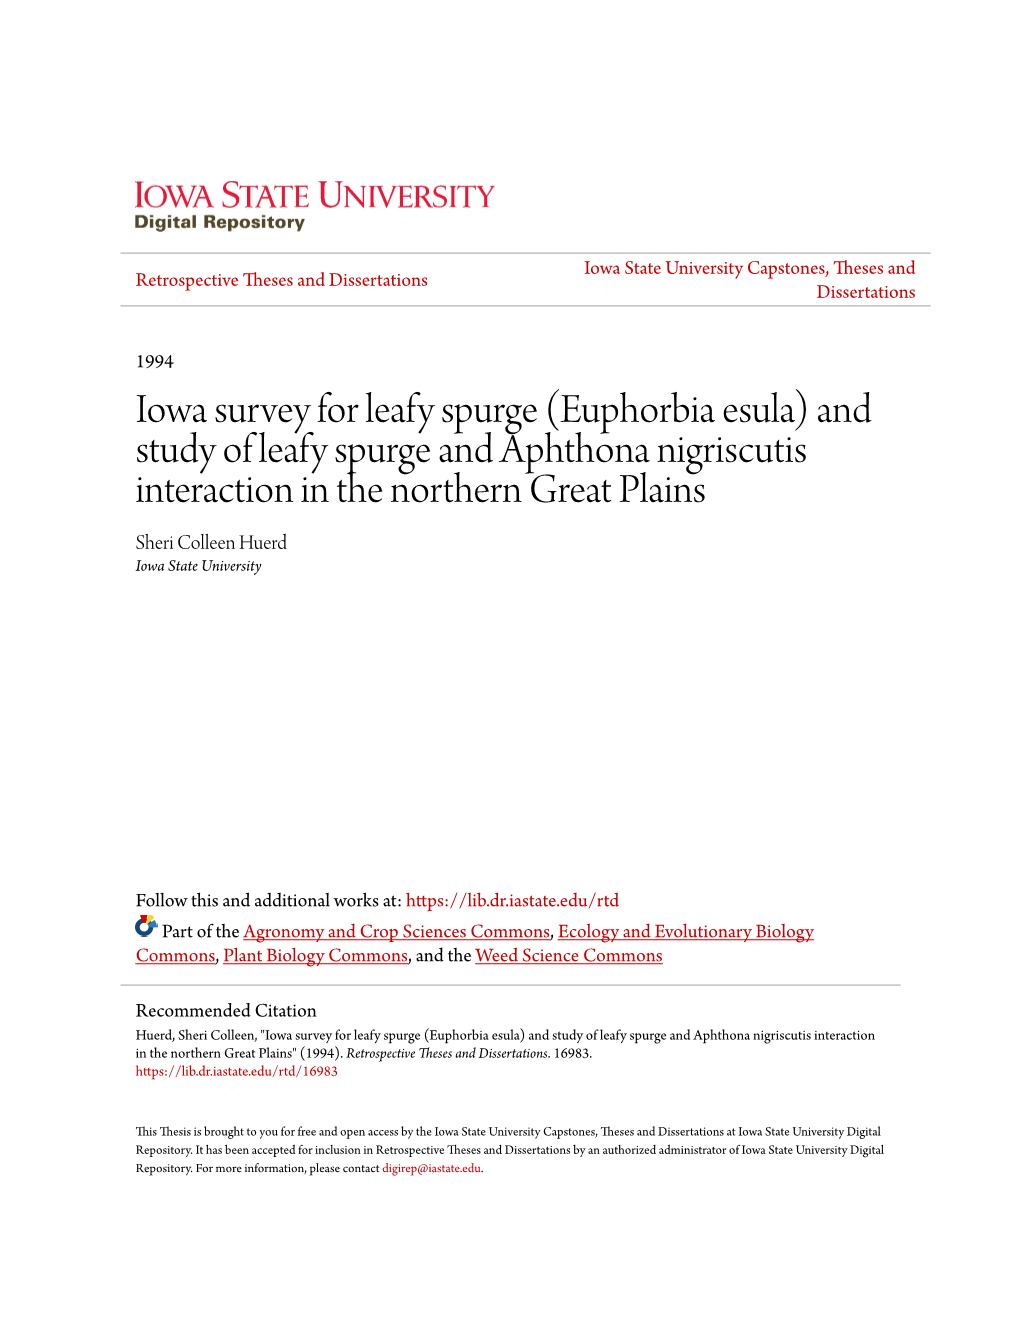 Euphorbia Esula) and Study of Leafy Spurge and Aphthona Nigriscutis Interaction in the Northern Great Plains Sheri Colleen Huerd Iowa State University